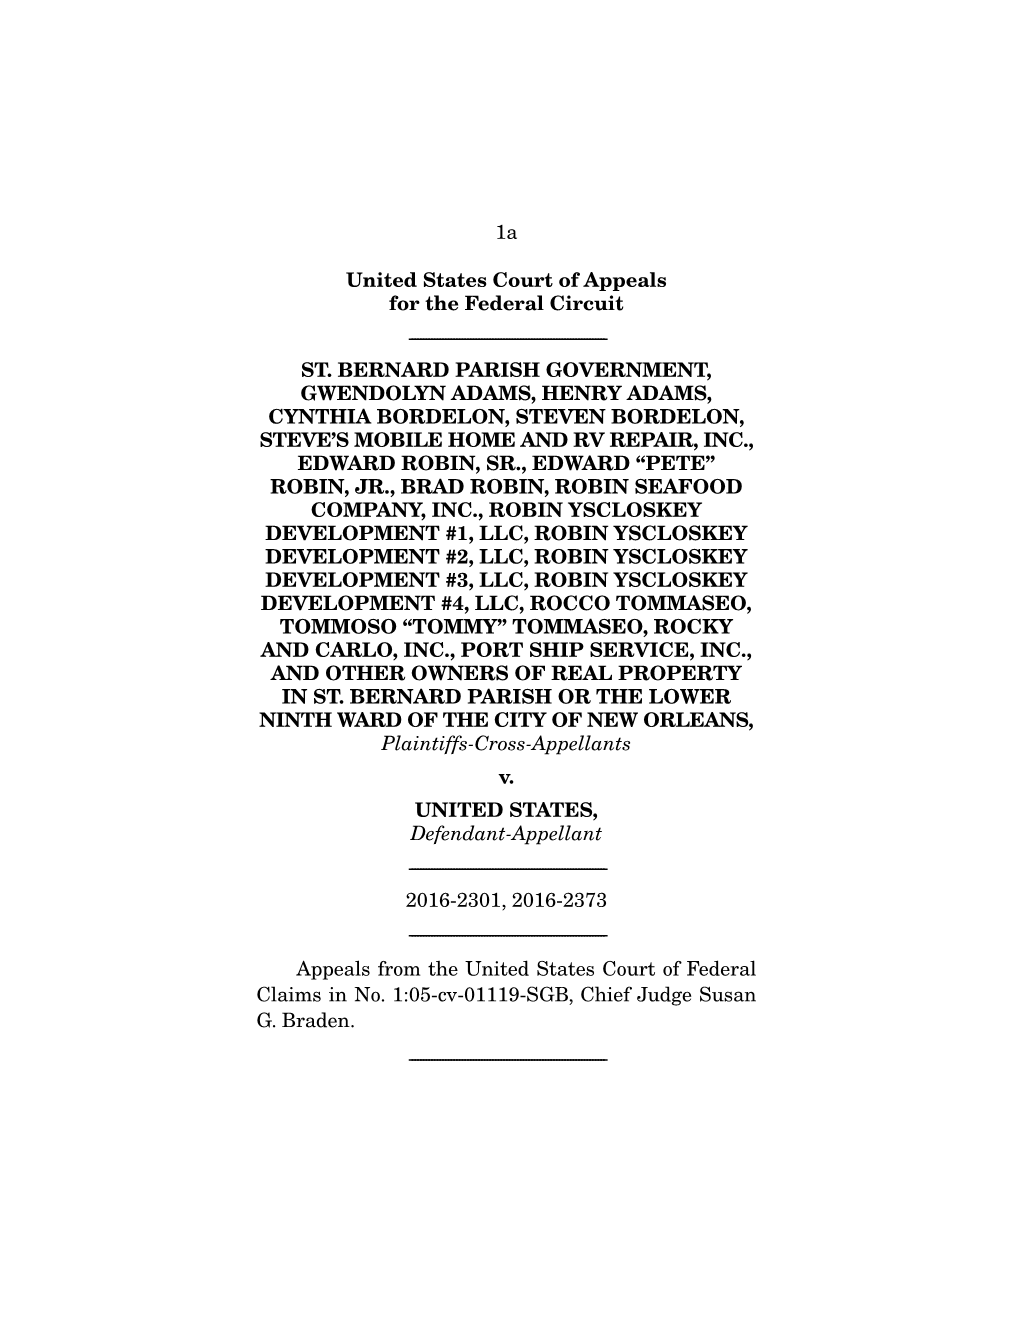 1A United States Court of Appeals for the Federal Circuit ST. BERNARD